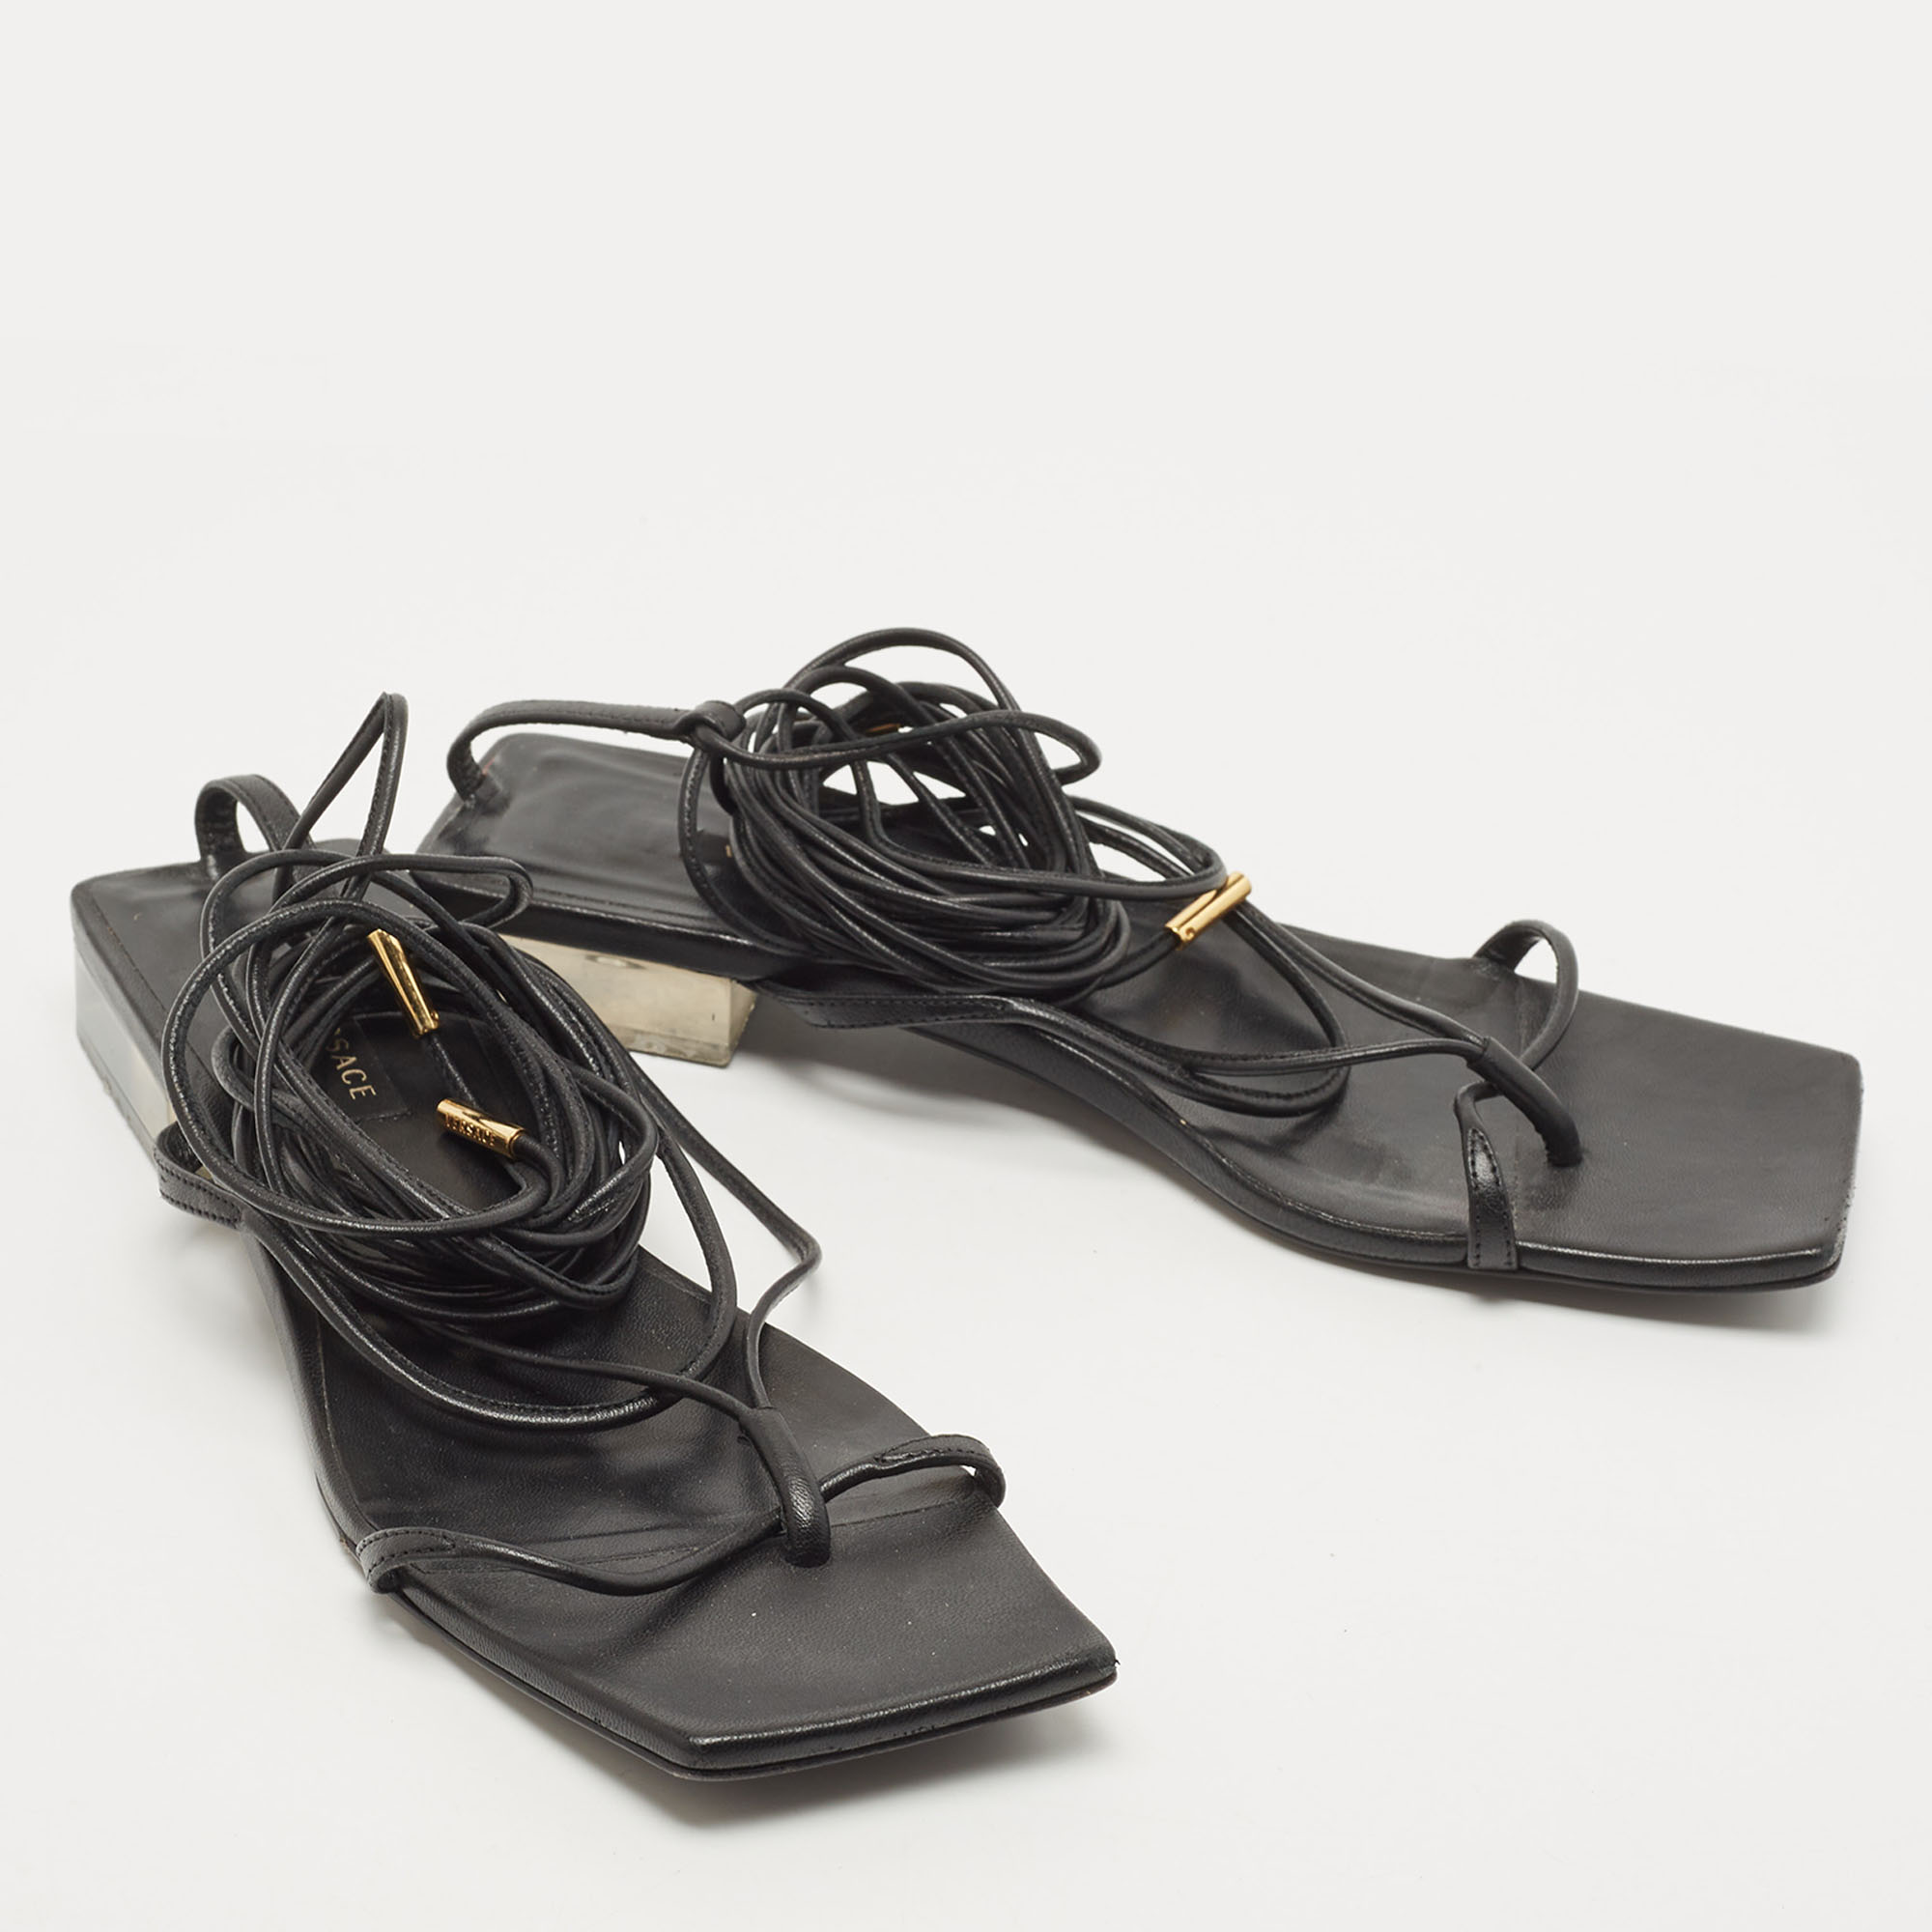 Versace Black Leather Lace Up Thong Sandals Size 38